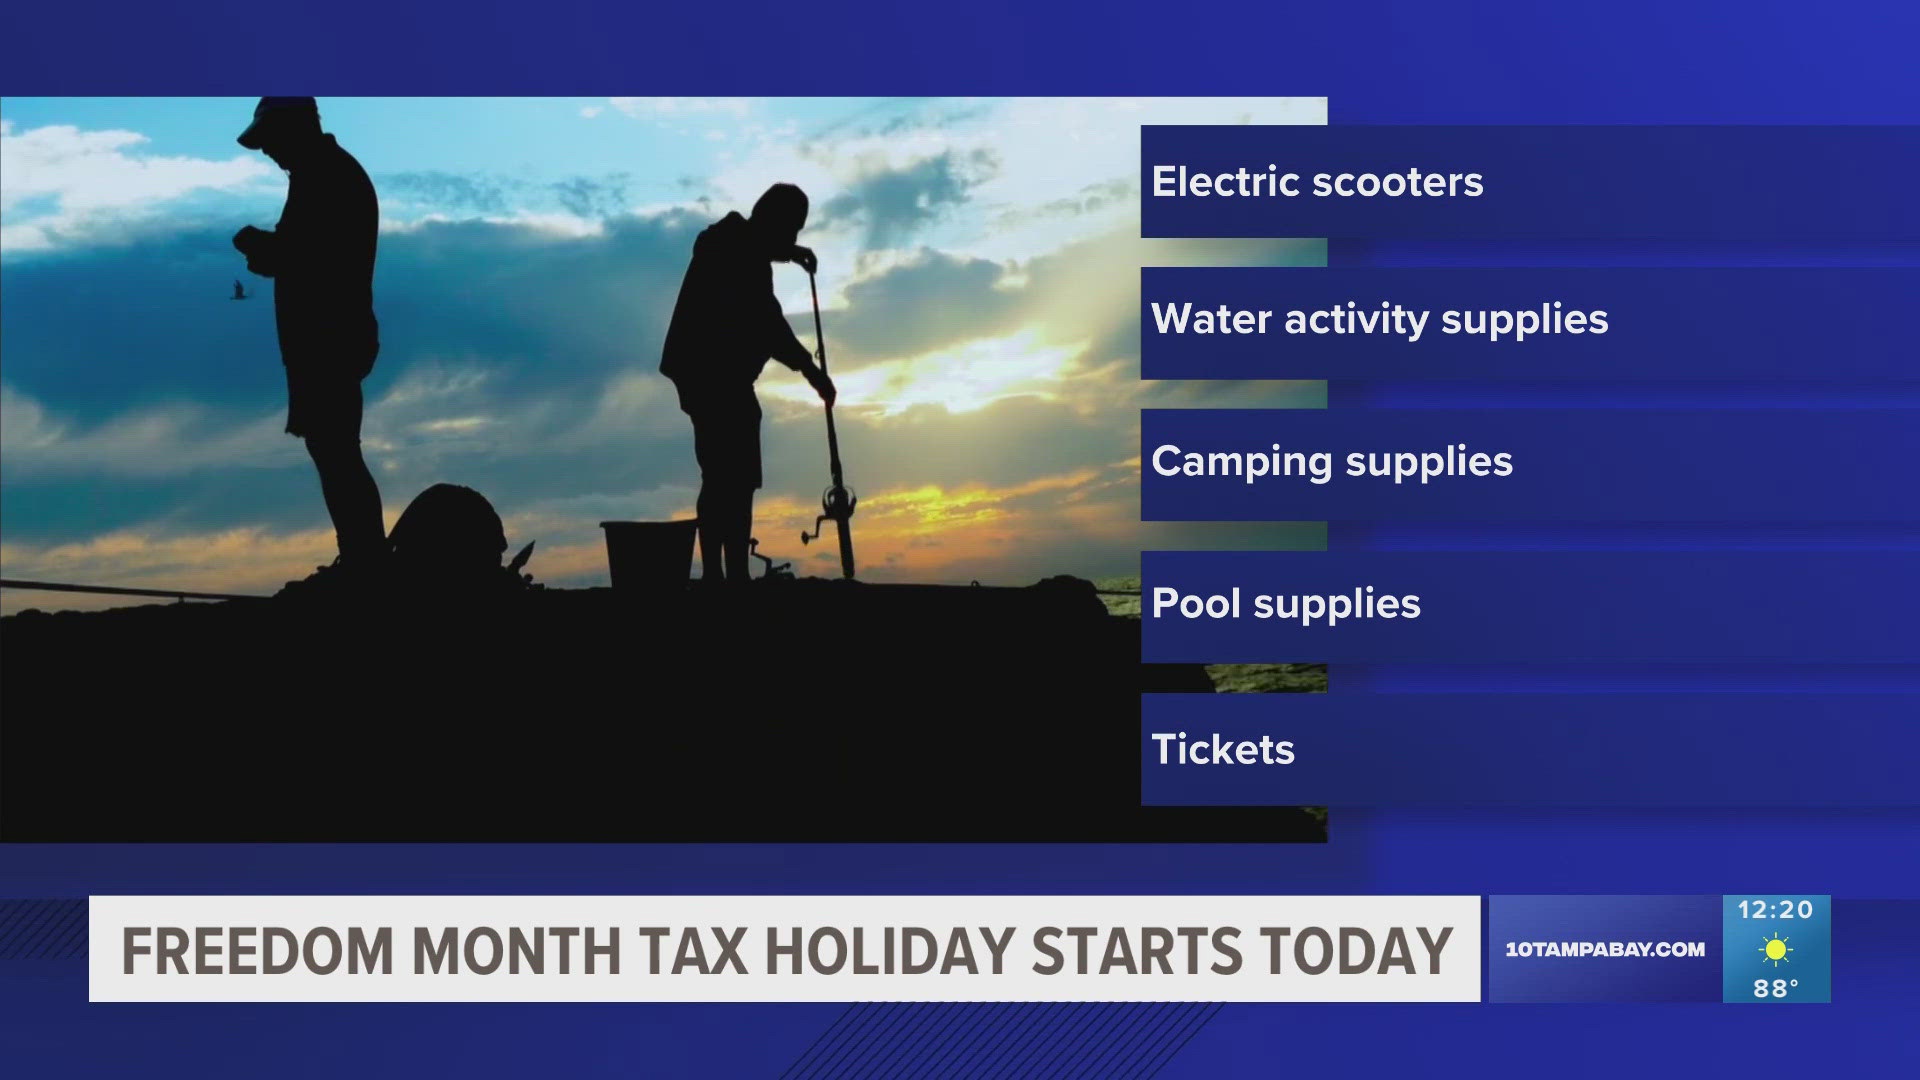 The tax-free holiday runs until the end of July, and includes select recreational activities and entertainment.